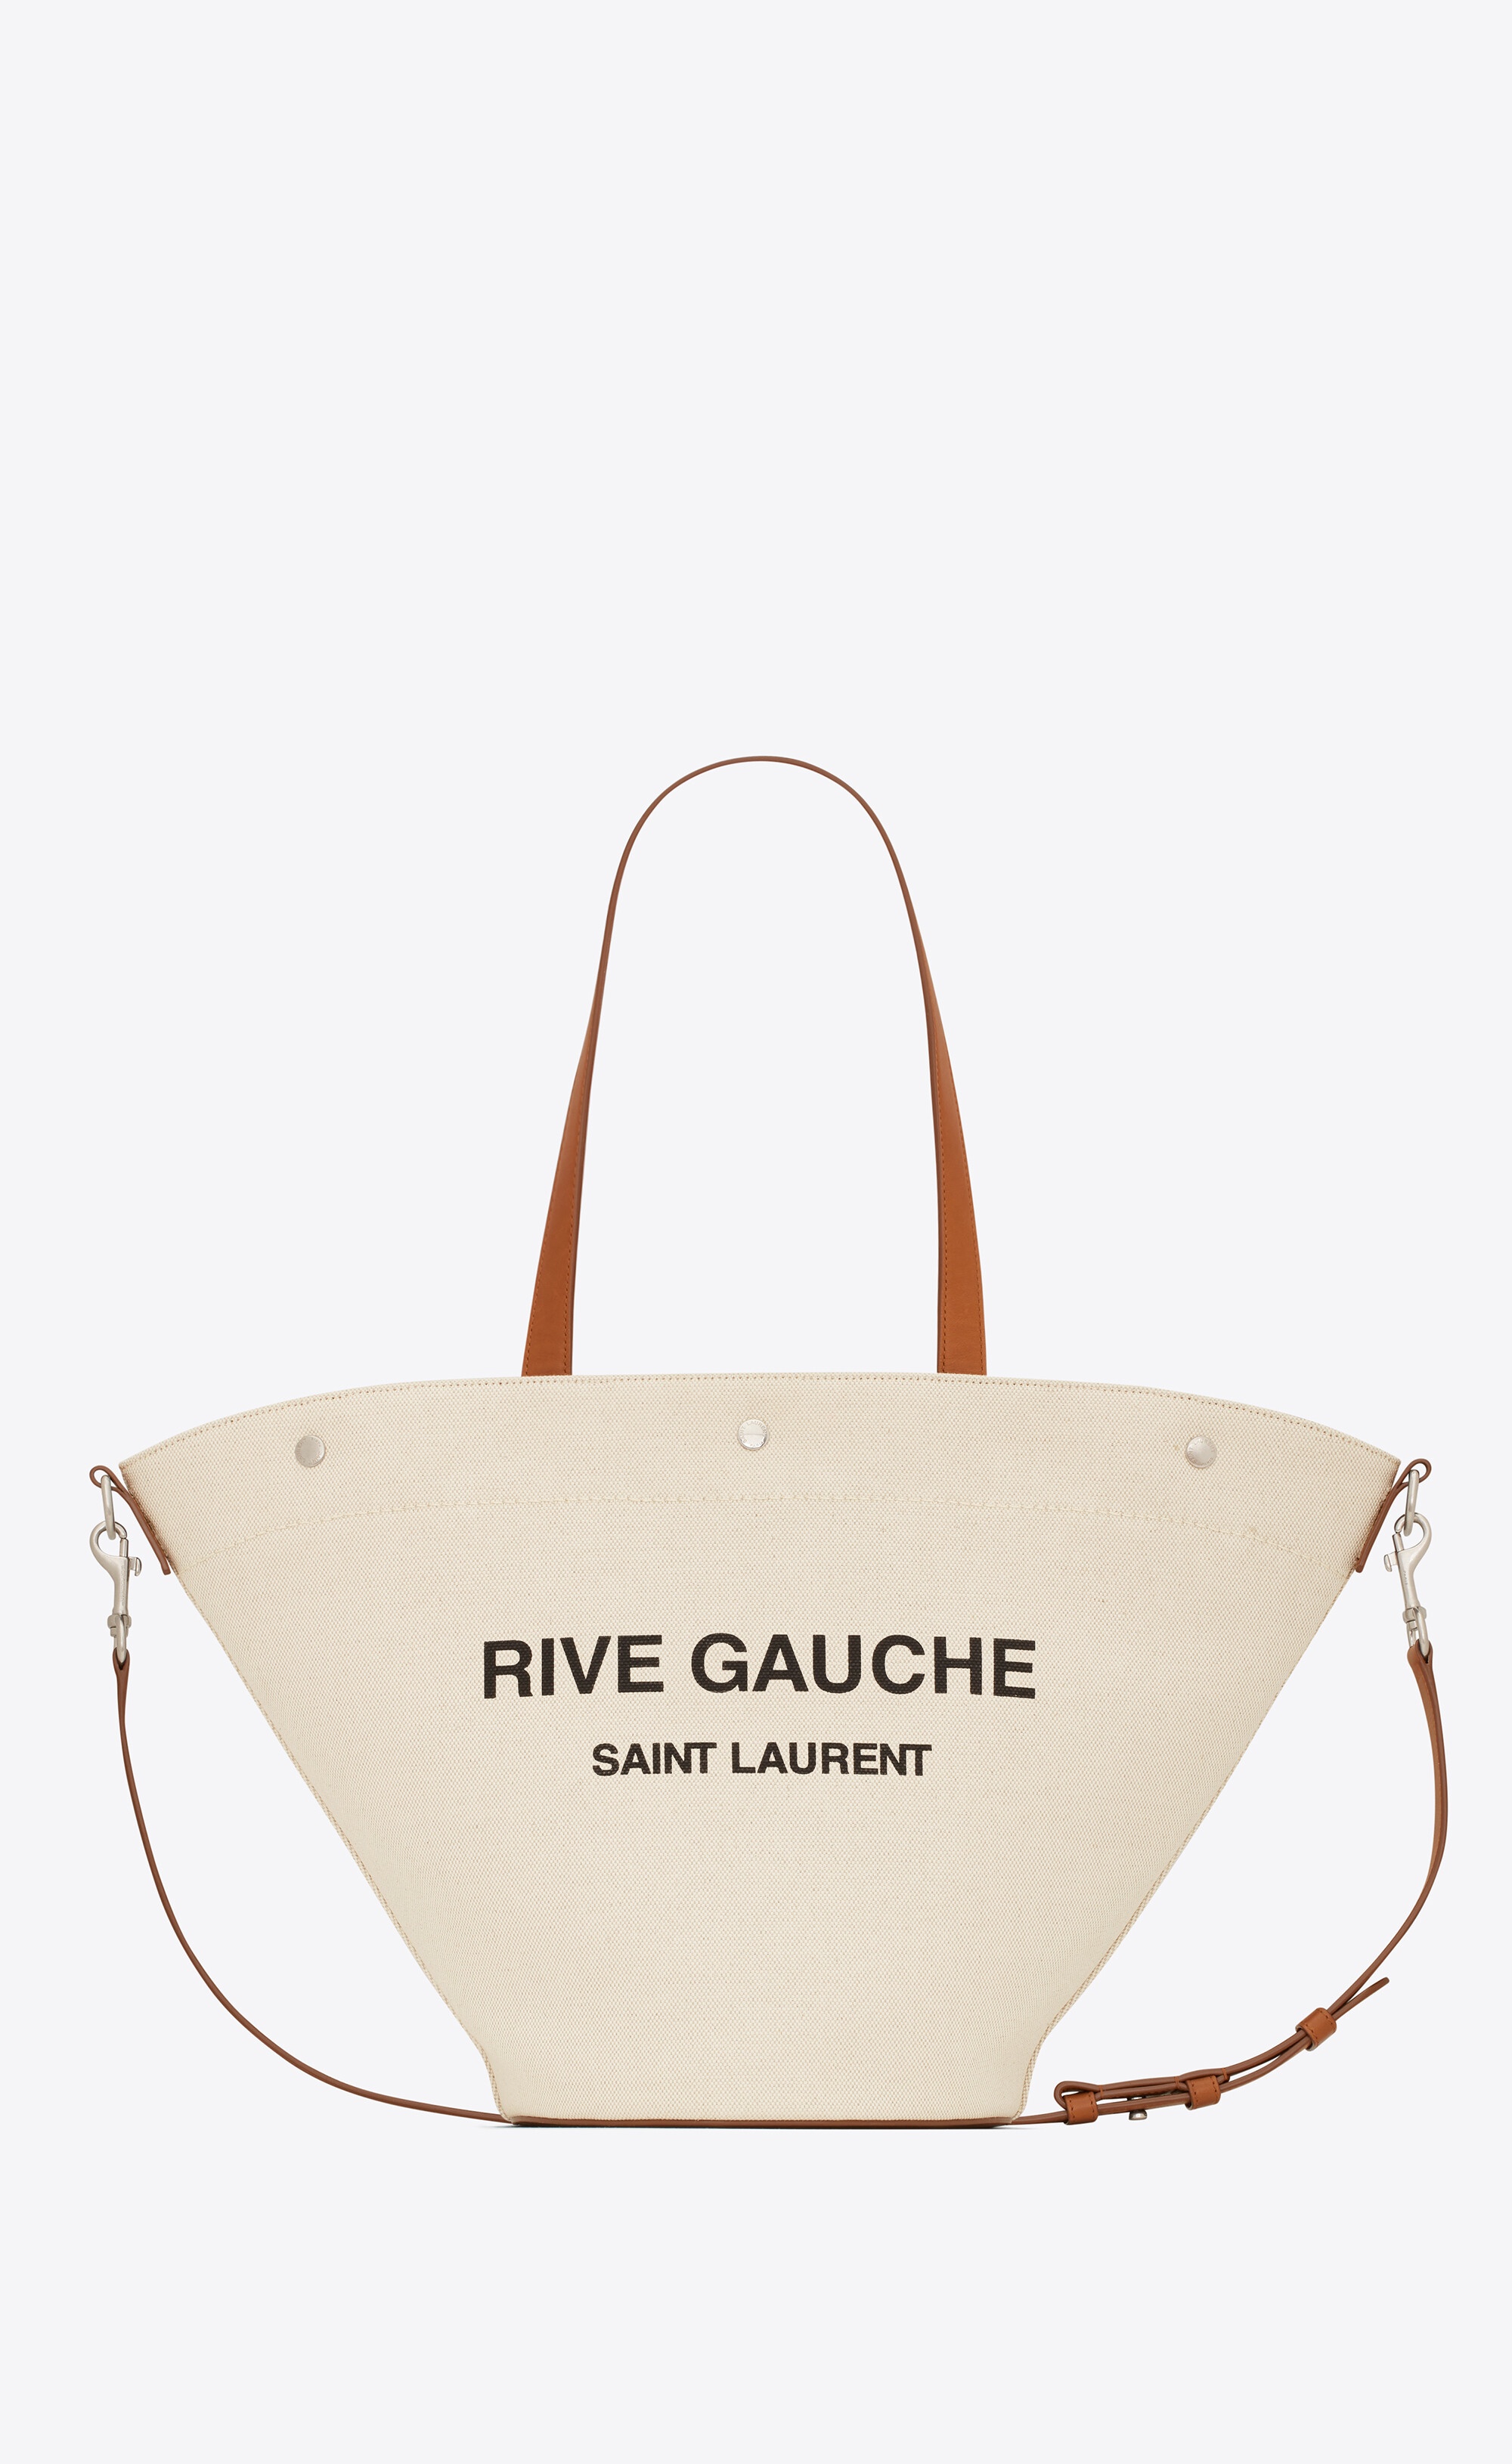 rive gauche tote bag in canvas and vintage leather - 3